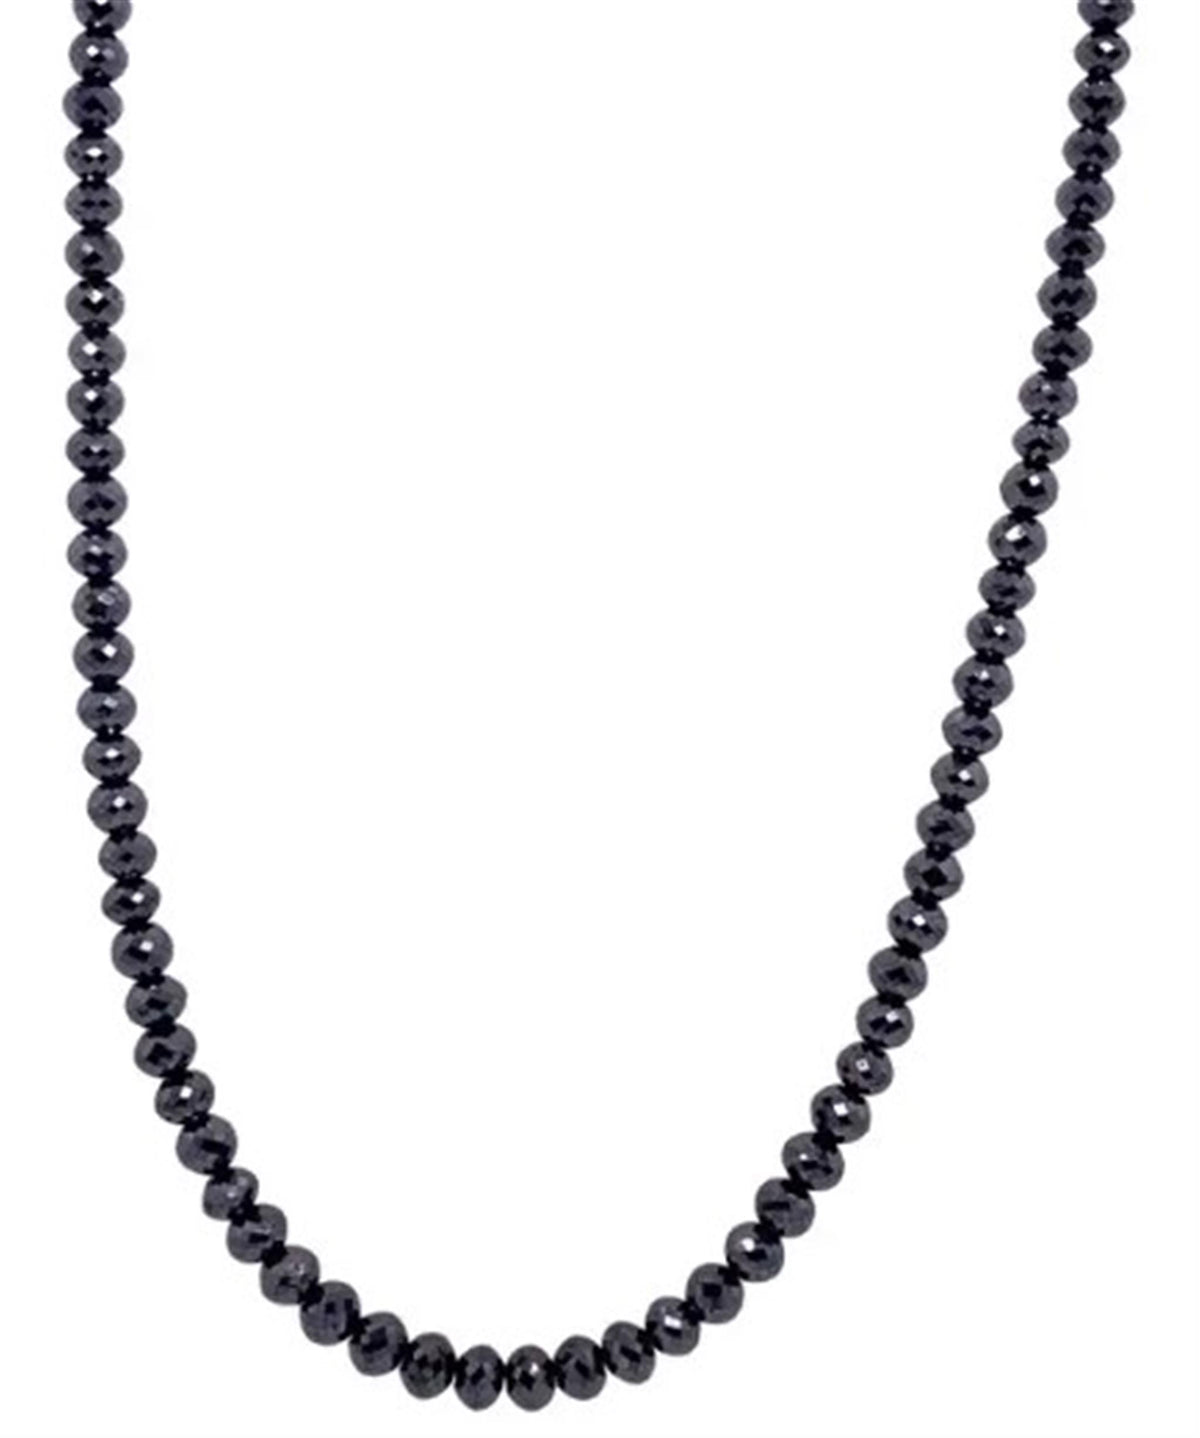 18" Faceted 3.2mm Black Diamond Bead Necklace - 44.70cttw